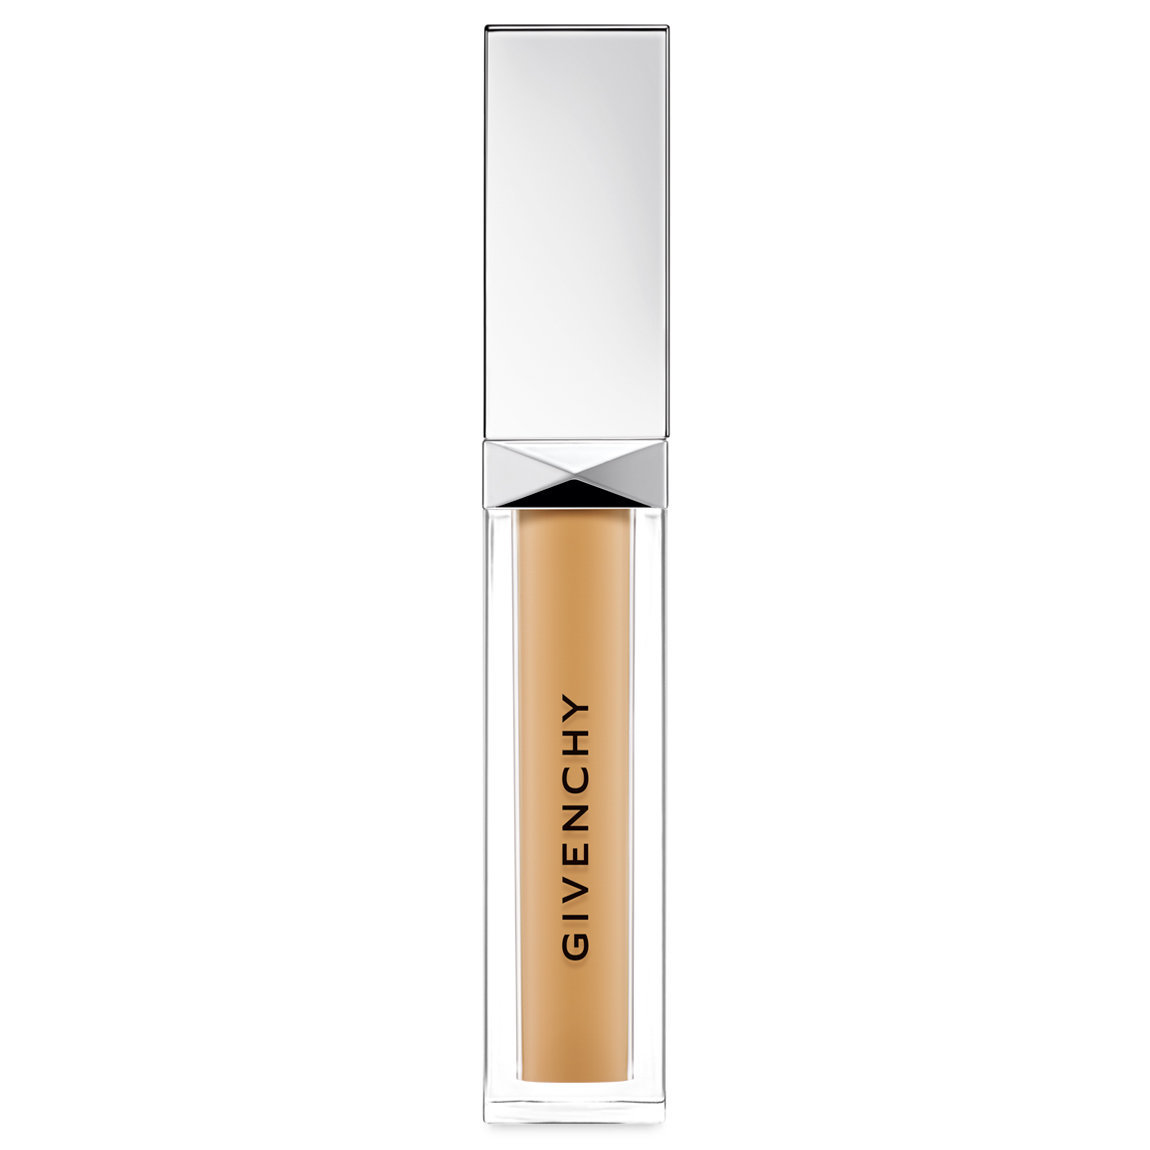 givenchy teint couture concealer